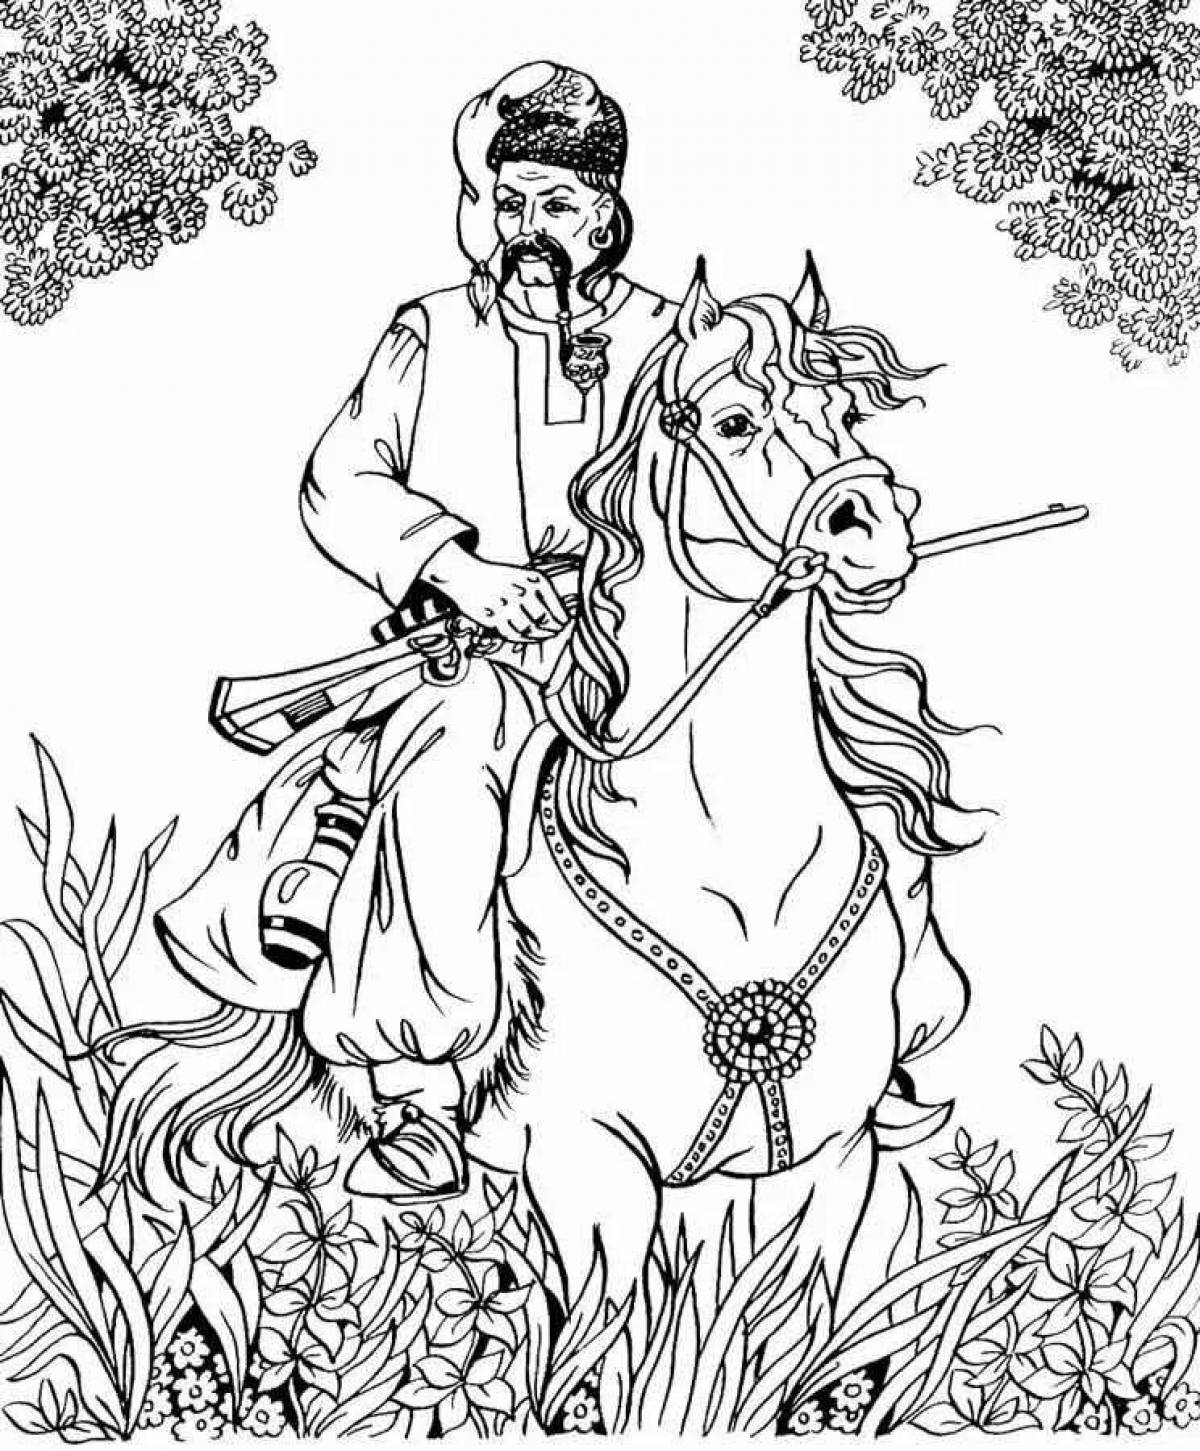 Glowing Don Cossacks coloring page